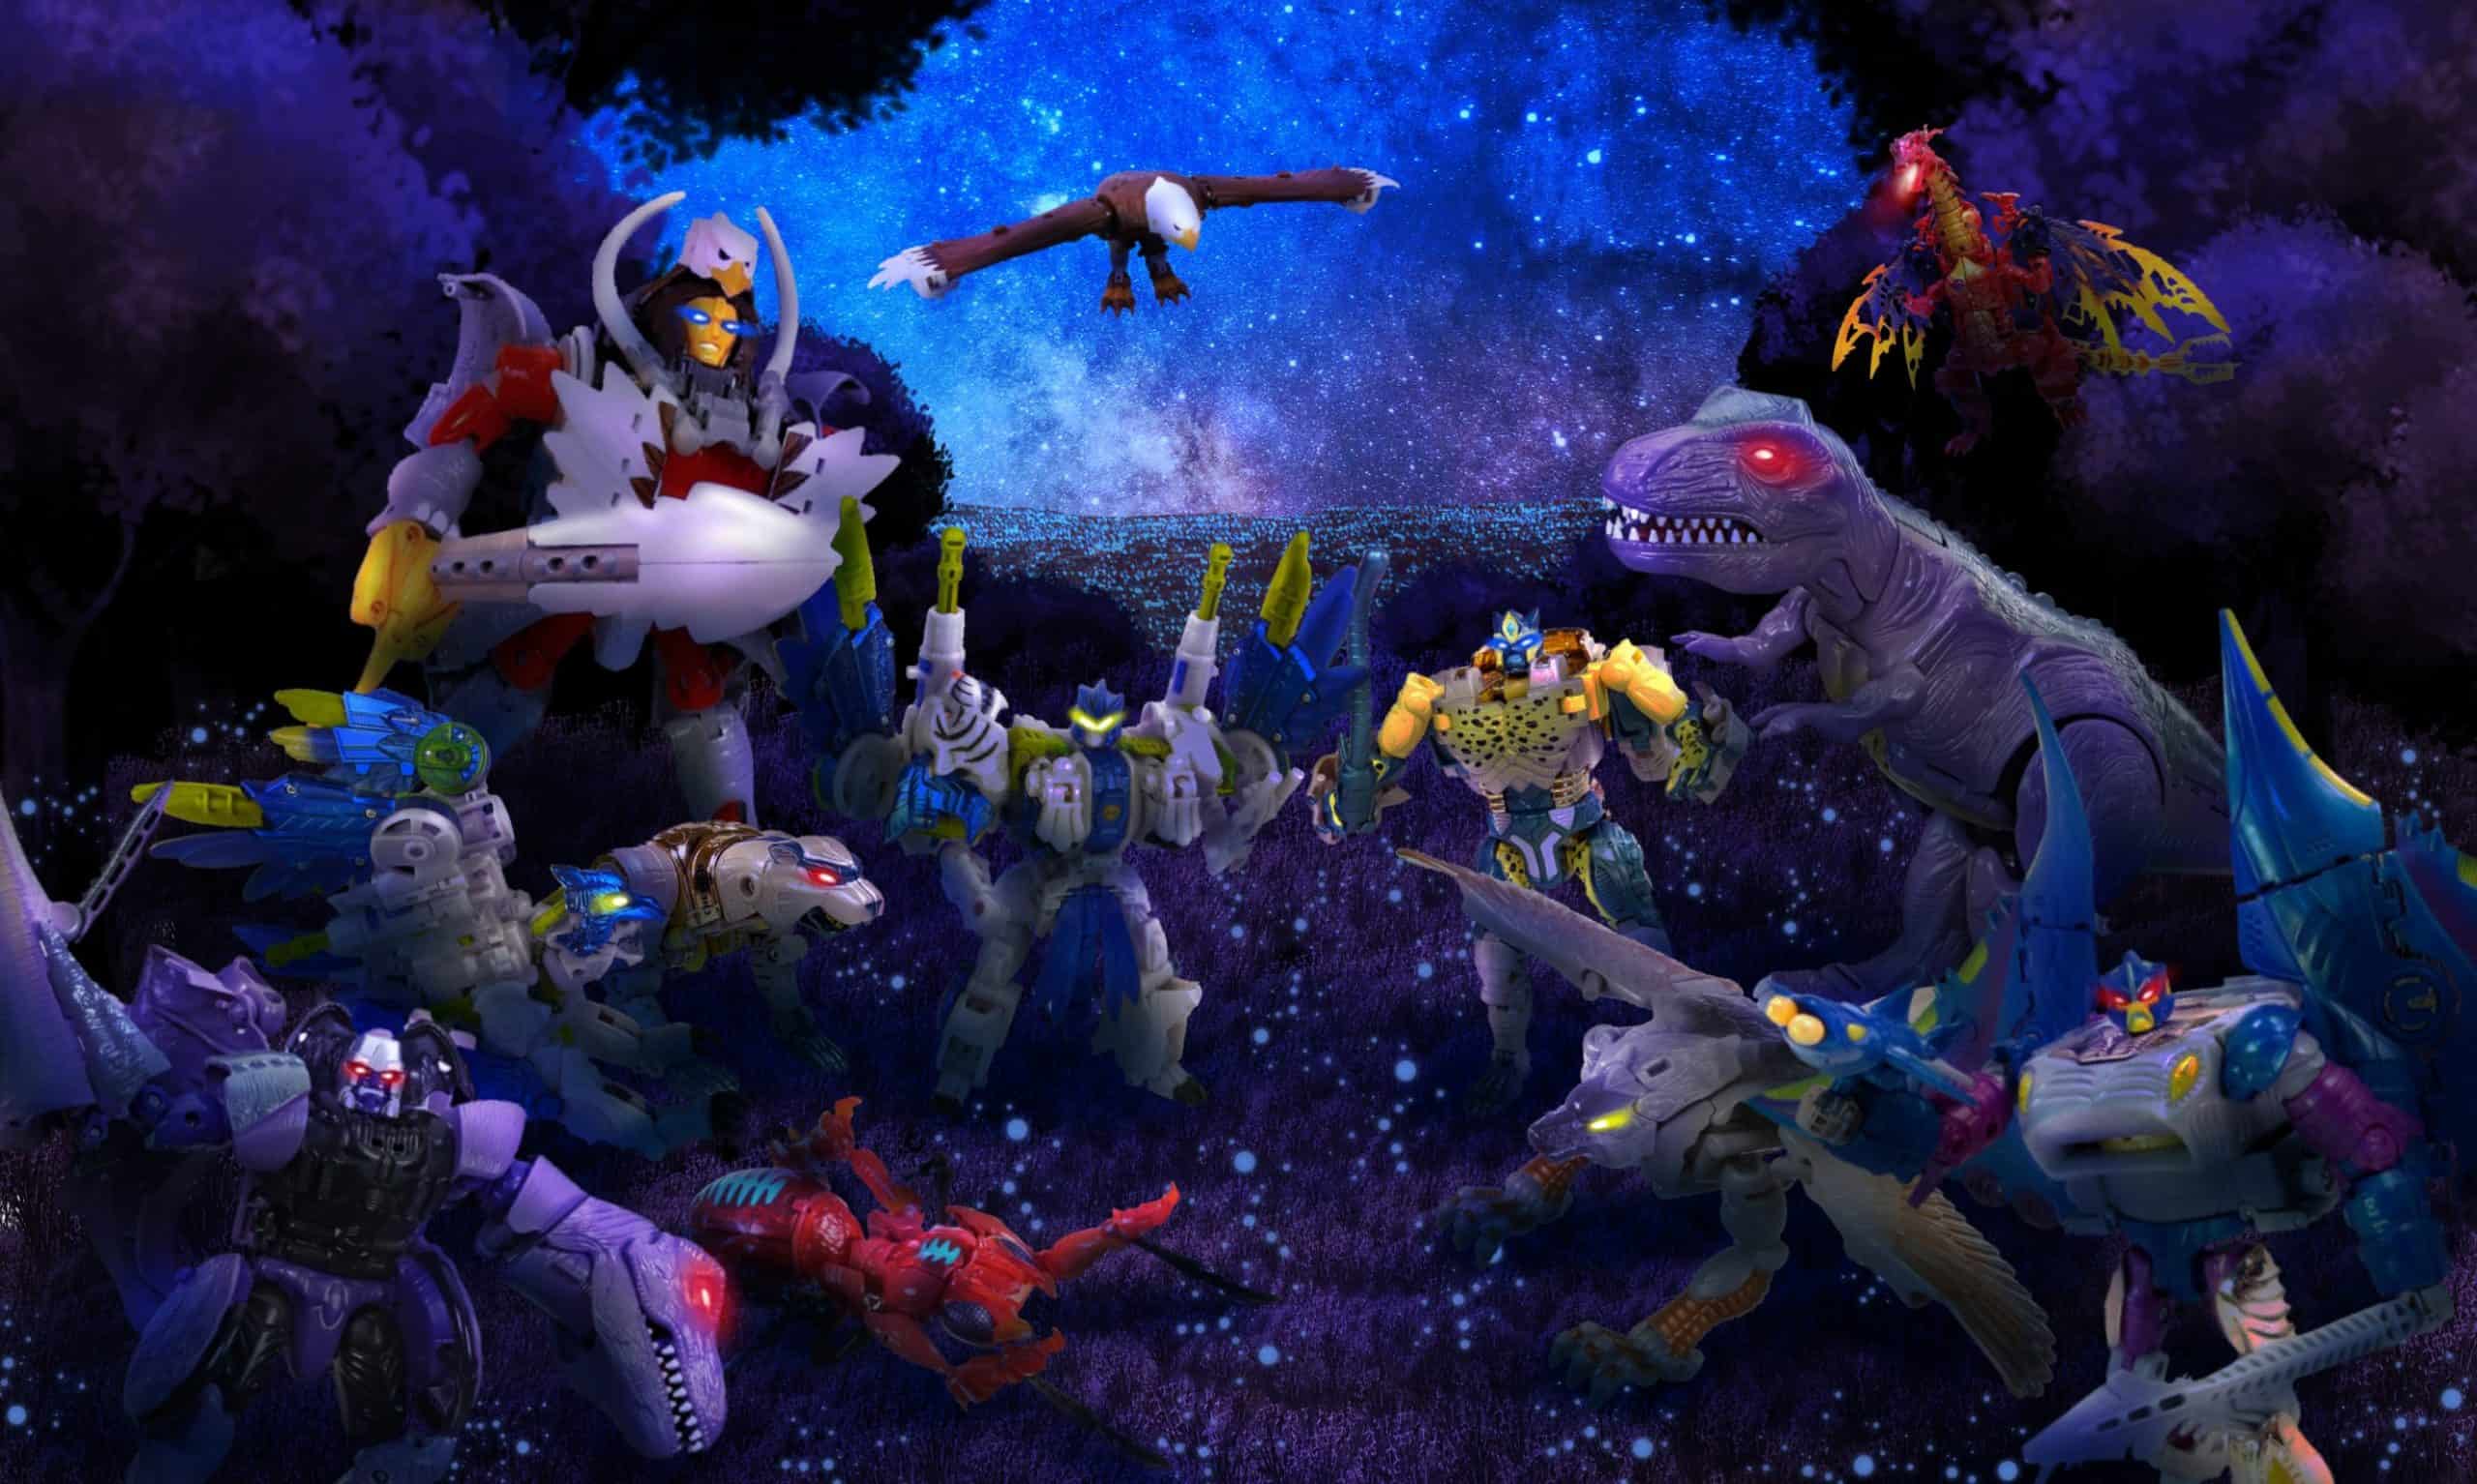 Beast Wars toys of the 90s